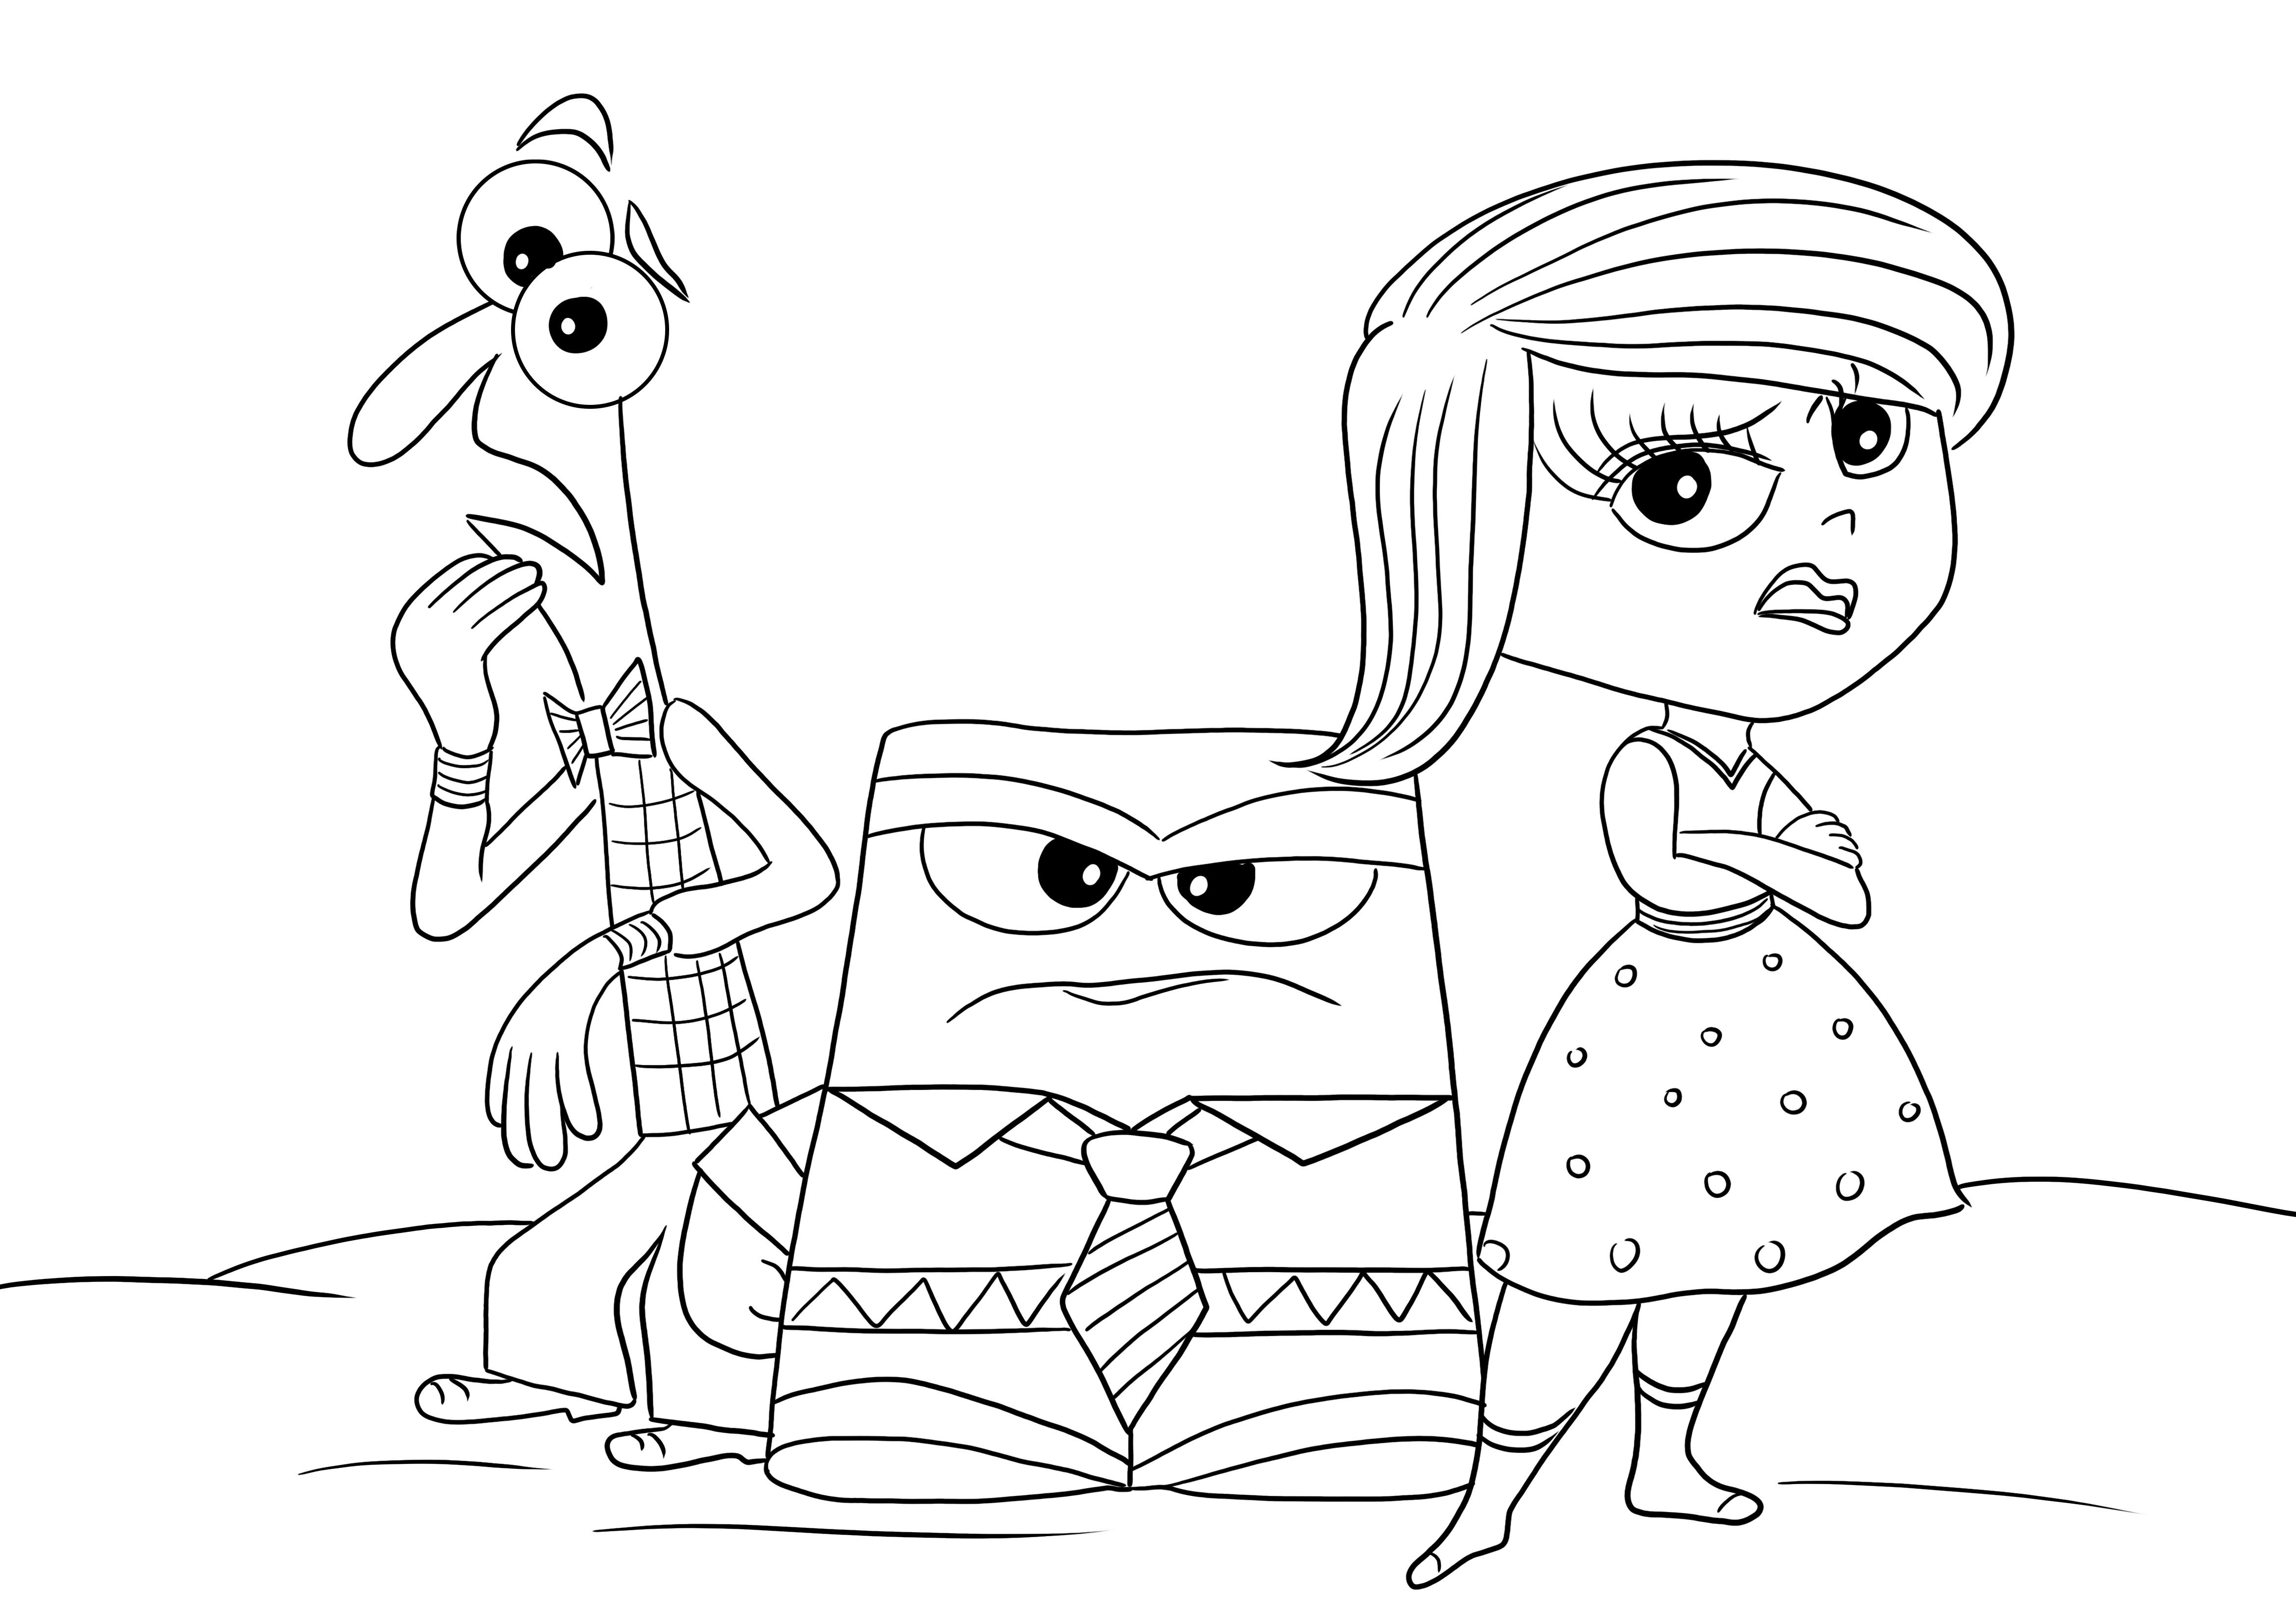 Fear-Anger-Disgust ready to be colored image and free to download